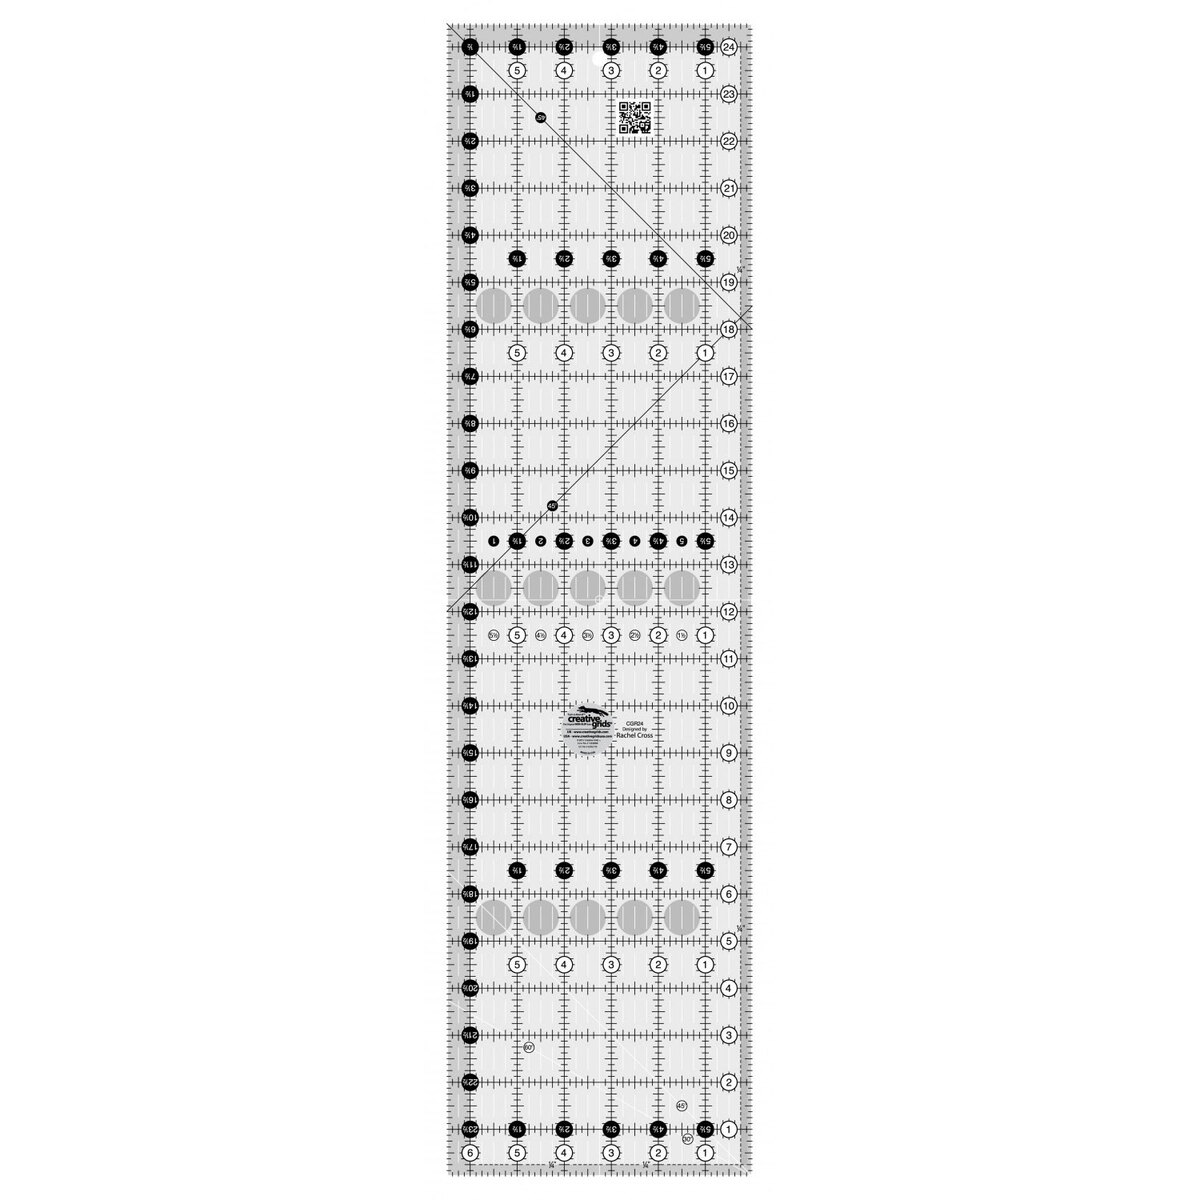 Creative Grids Quilt Ruler 2-1/2in x 24-1/2in - CGR224